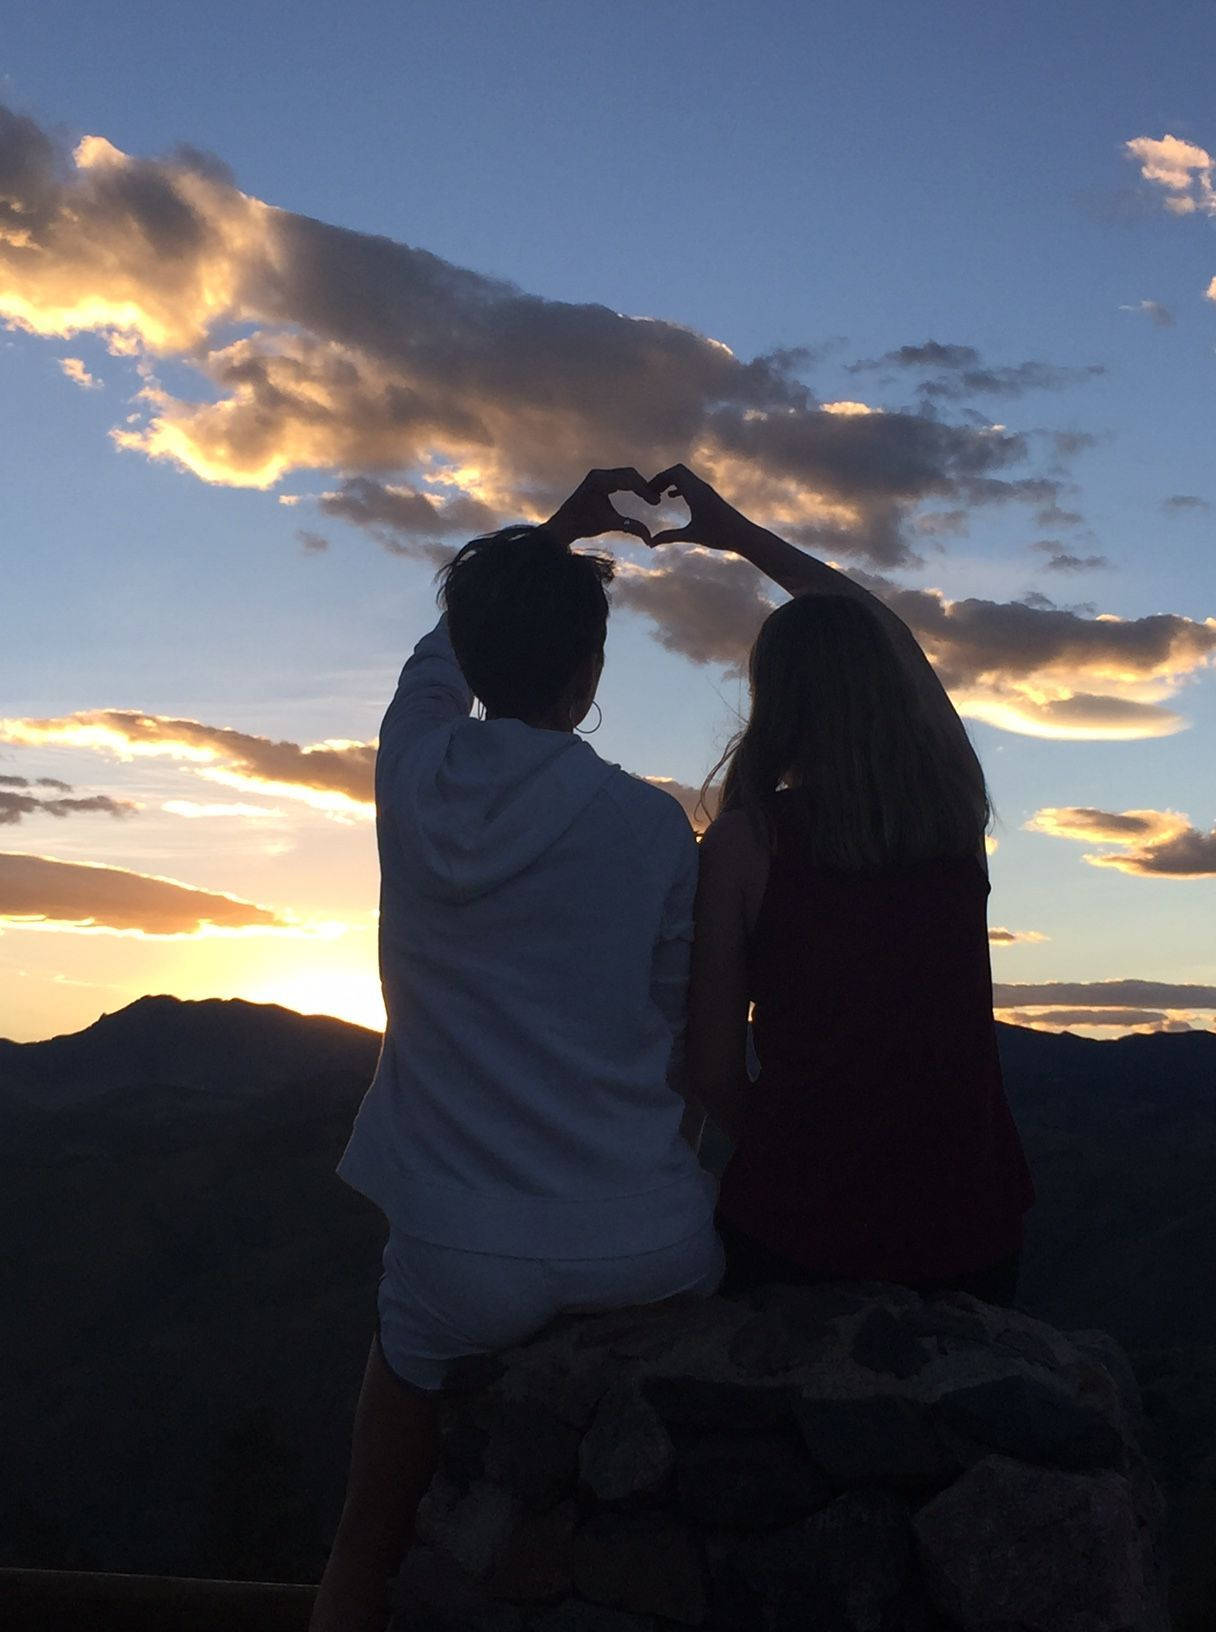 Cute Couple Making Heart At Sunset